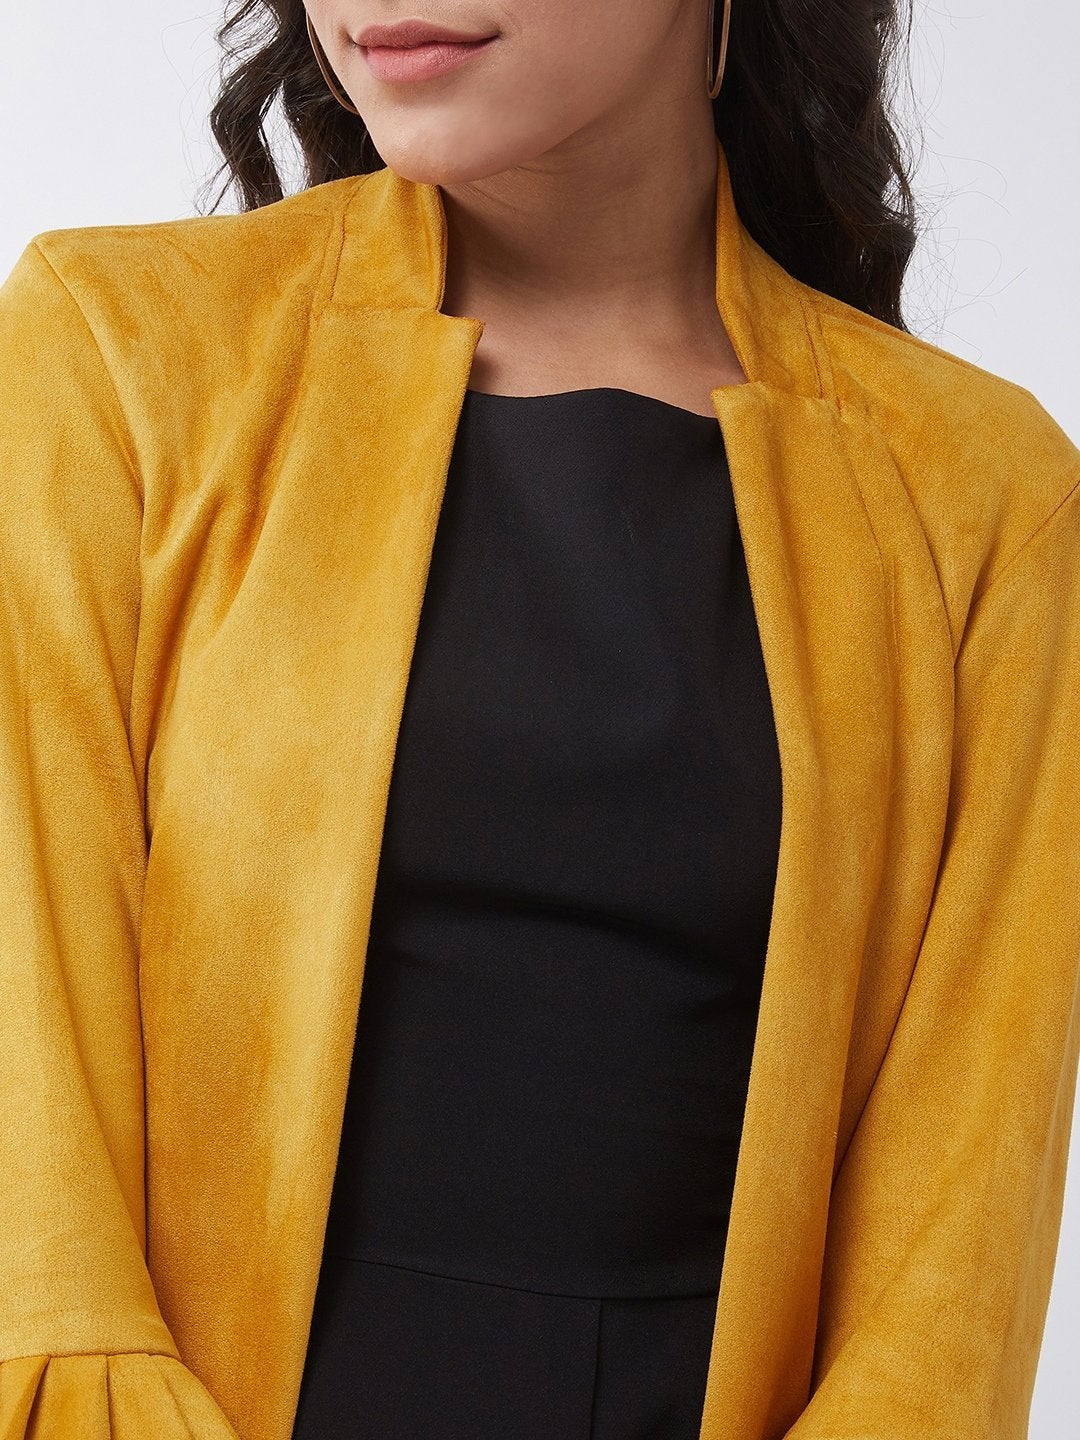 Women's Solid Blazer With Ruffle - Pannkh